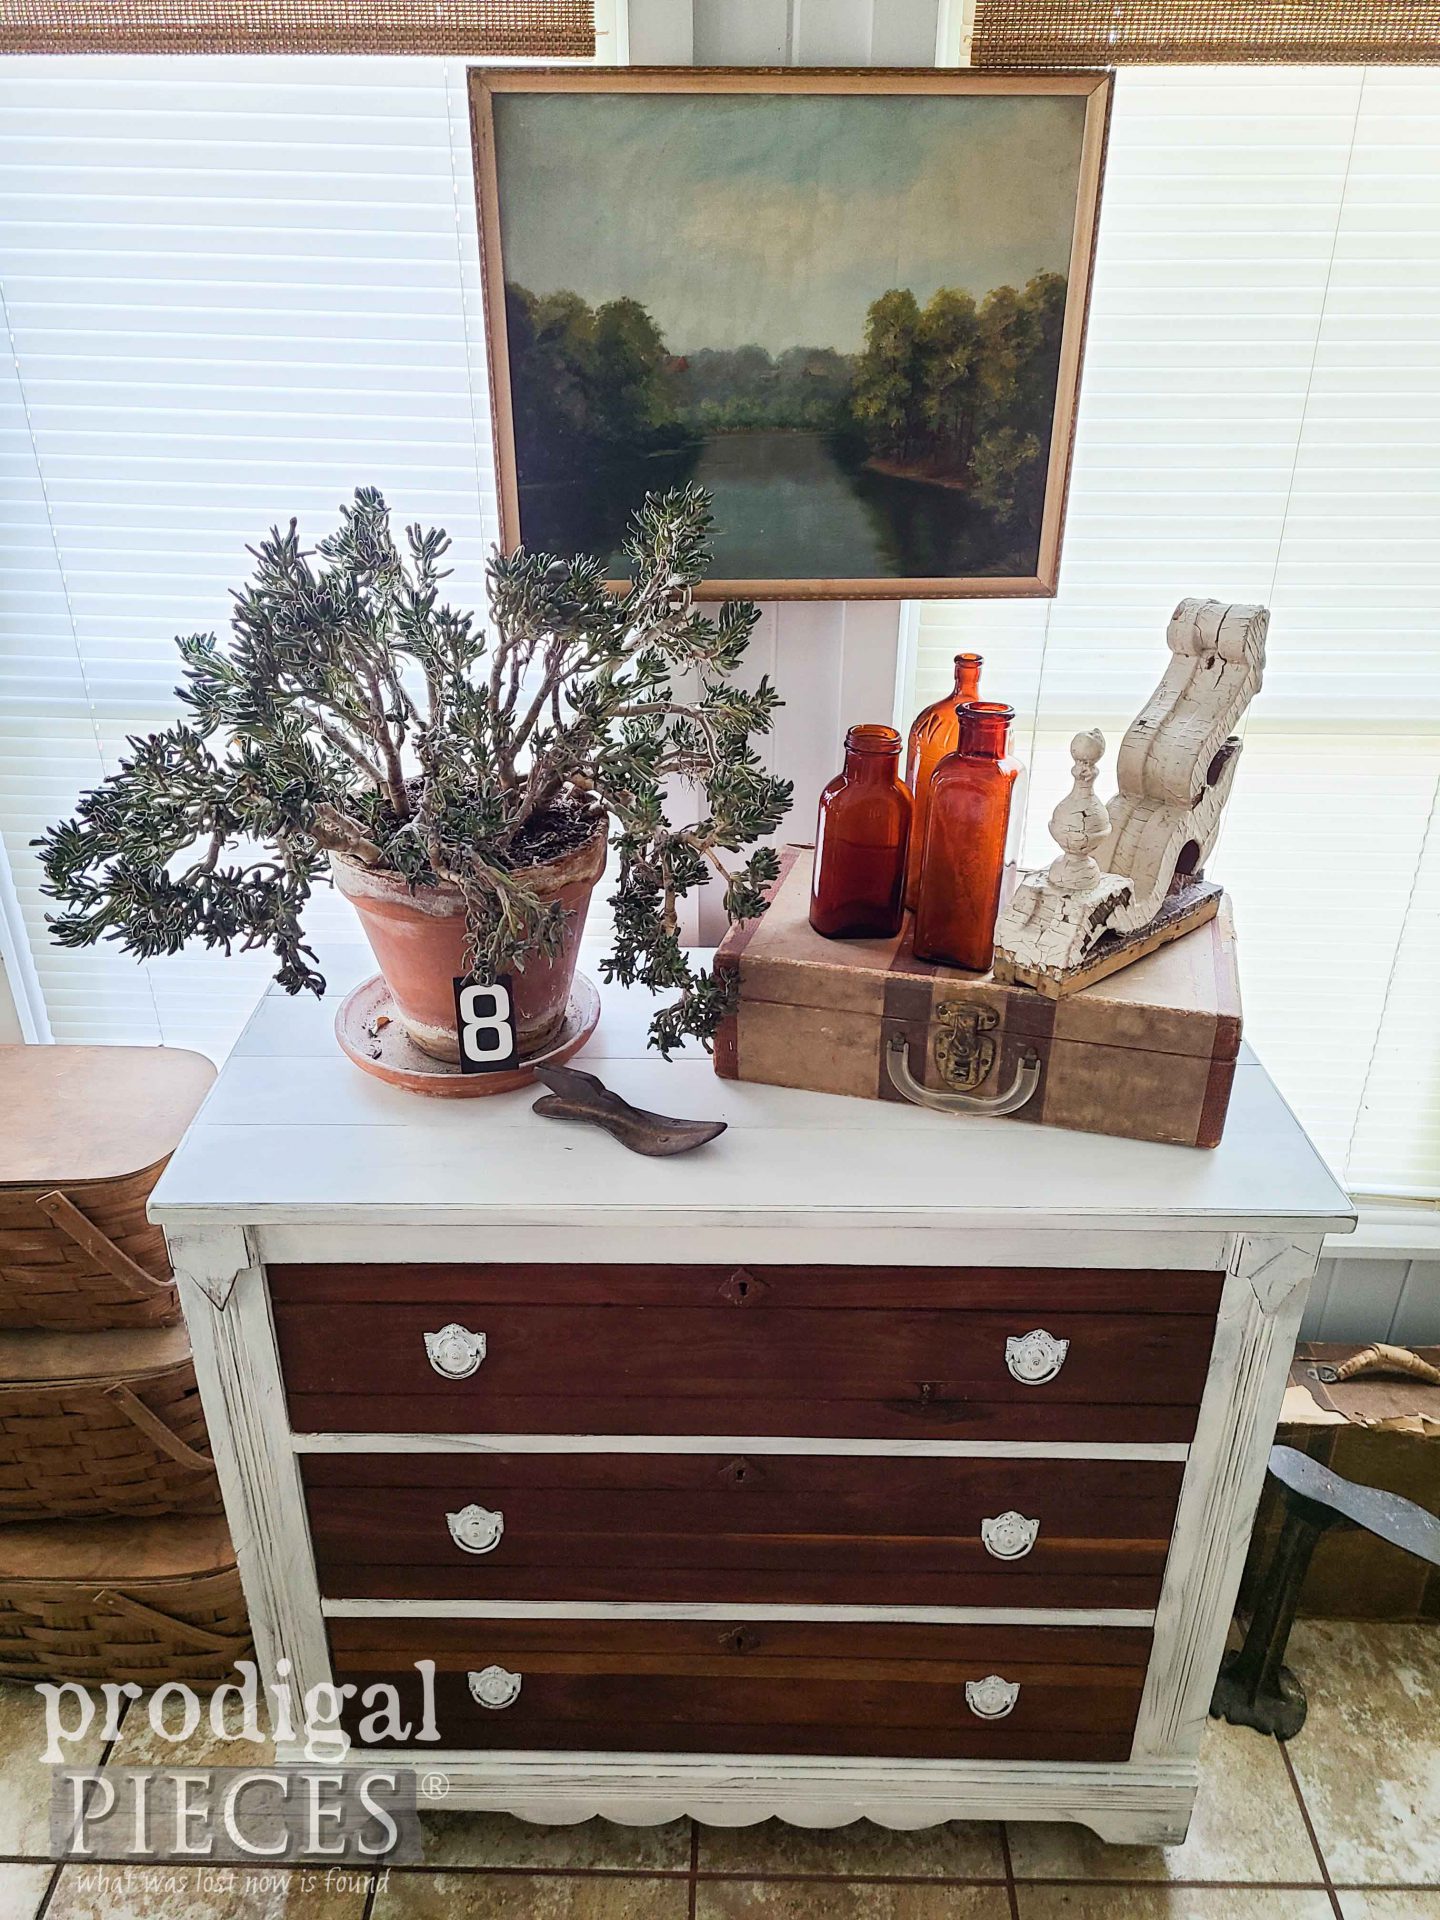 Top View of Antique Chest of Drawers Restored by Larissa of Prodigal Pieces | prodigalpieces.com #prodigalpieces #rustic #farmhouse #diy